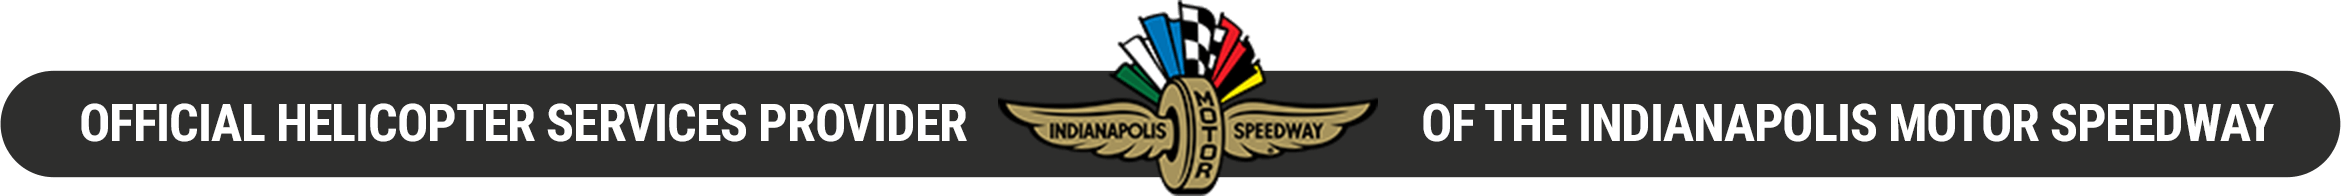 Official Helicopter Service Provider of the Indy 500